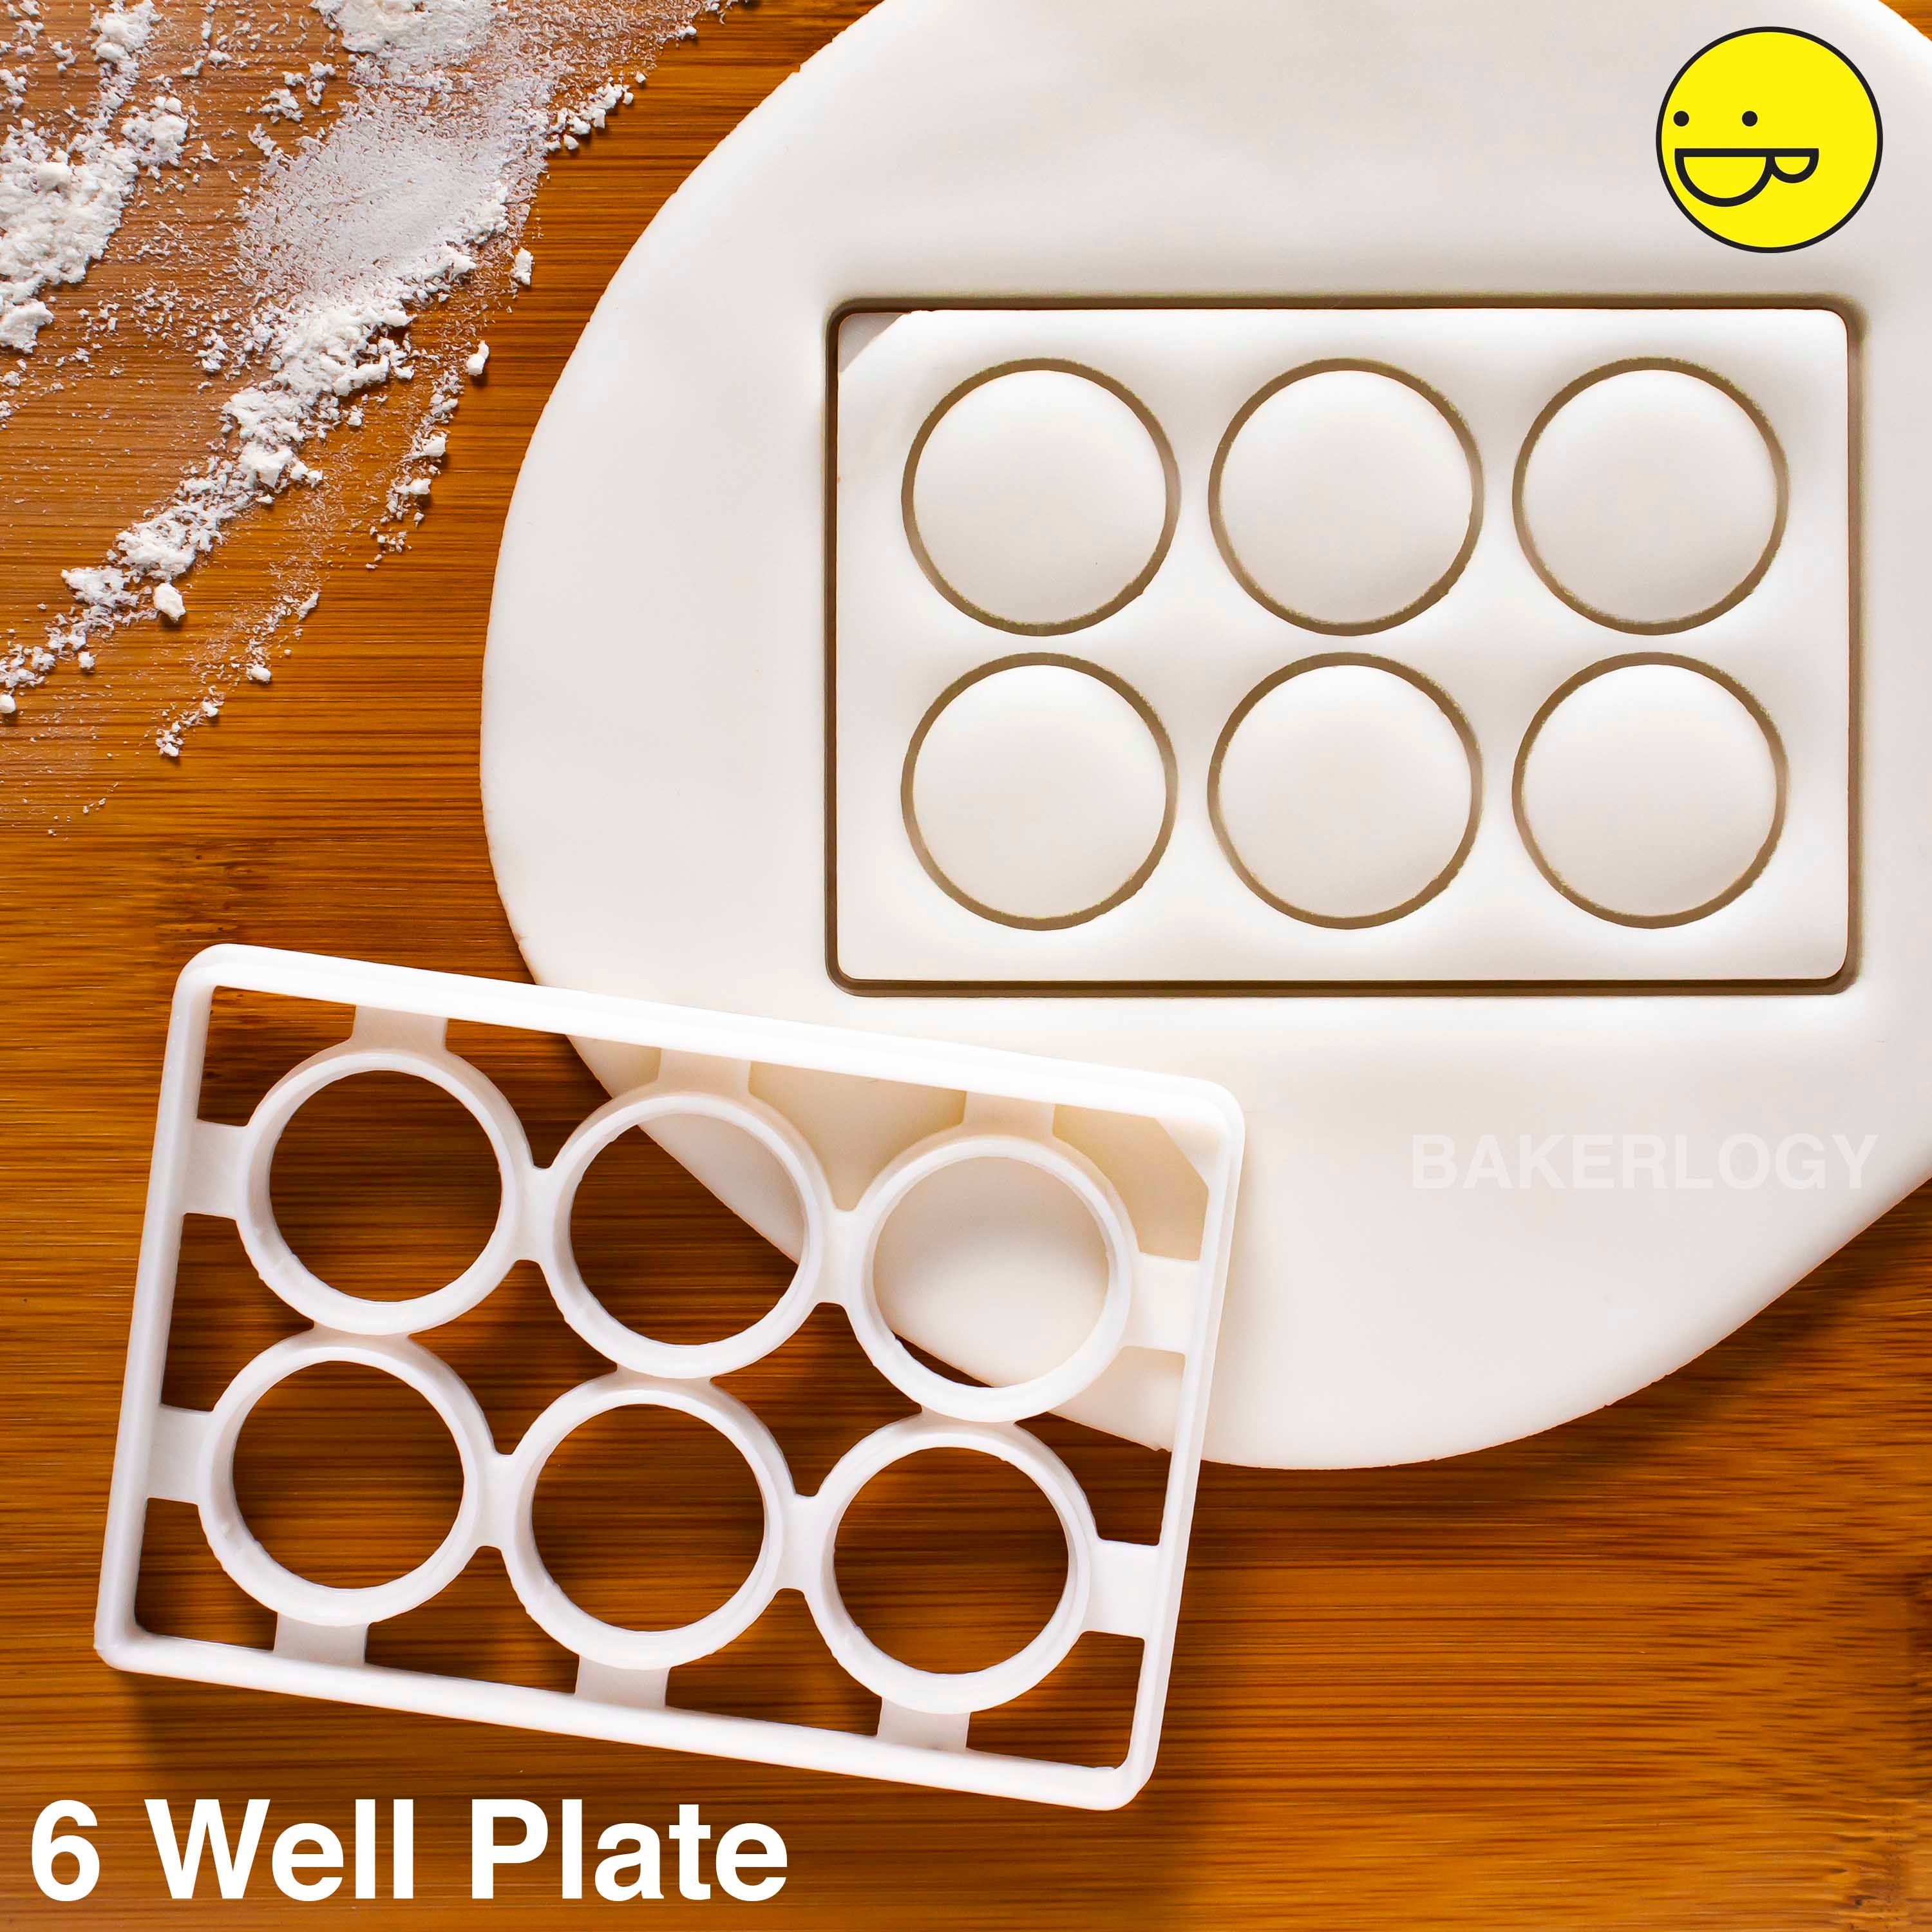 Laboratory 6 Well Plate Cookie Cutter Bakerlogy Biscuit Etsy 日本